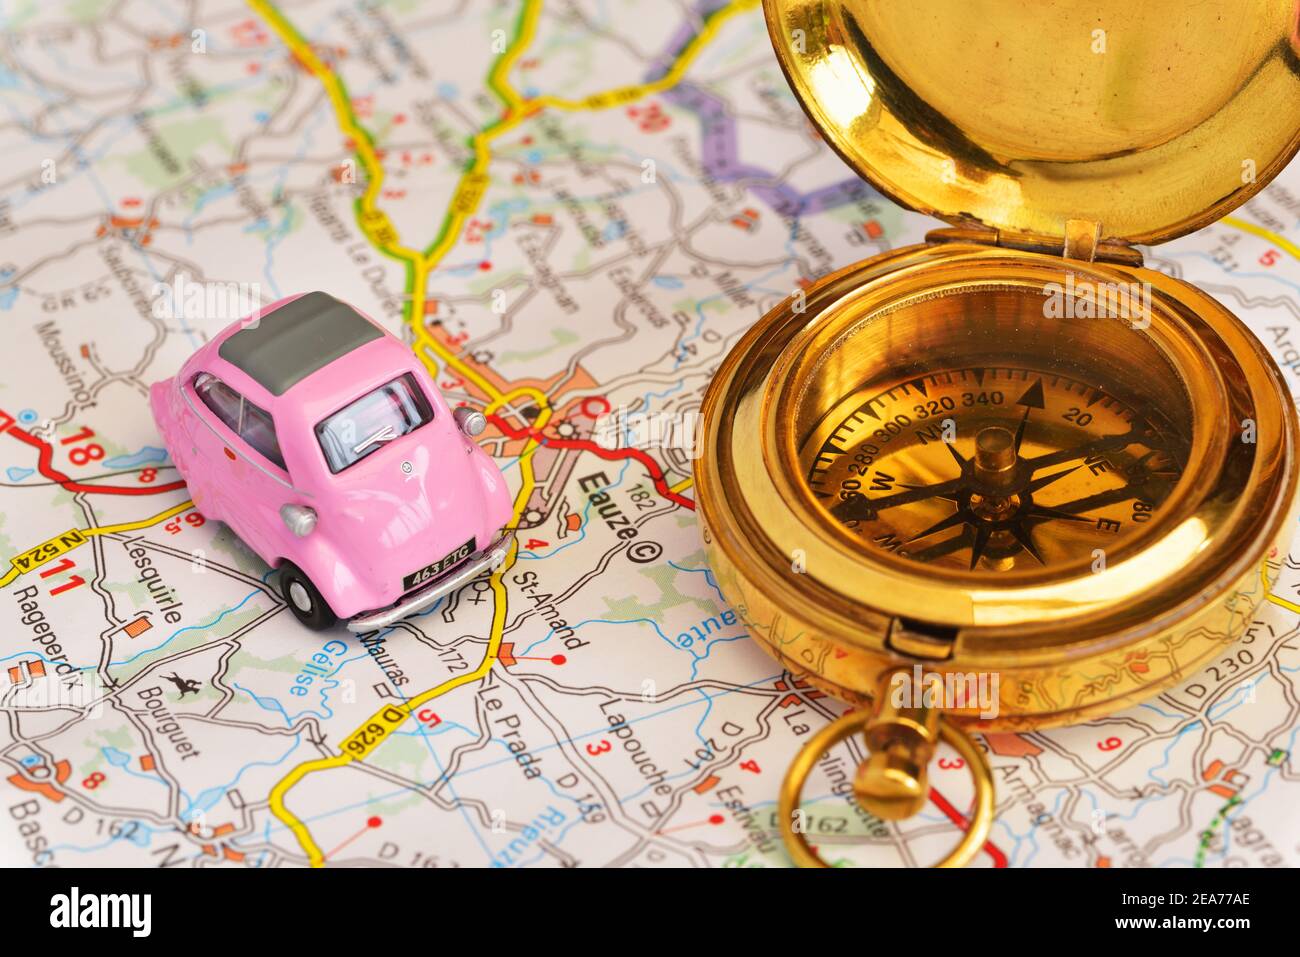 Toy 1950's pink BMW Isetta bubble car and a compass on map of France showing part of the Armagnac producing region Stock Photo